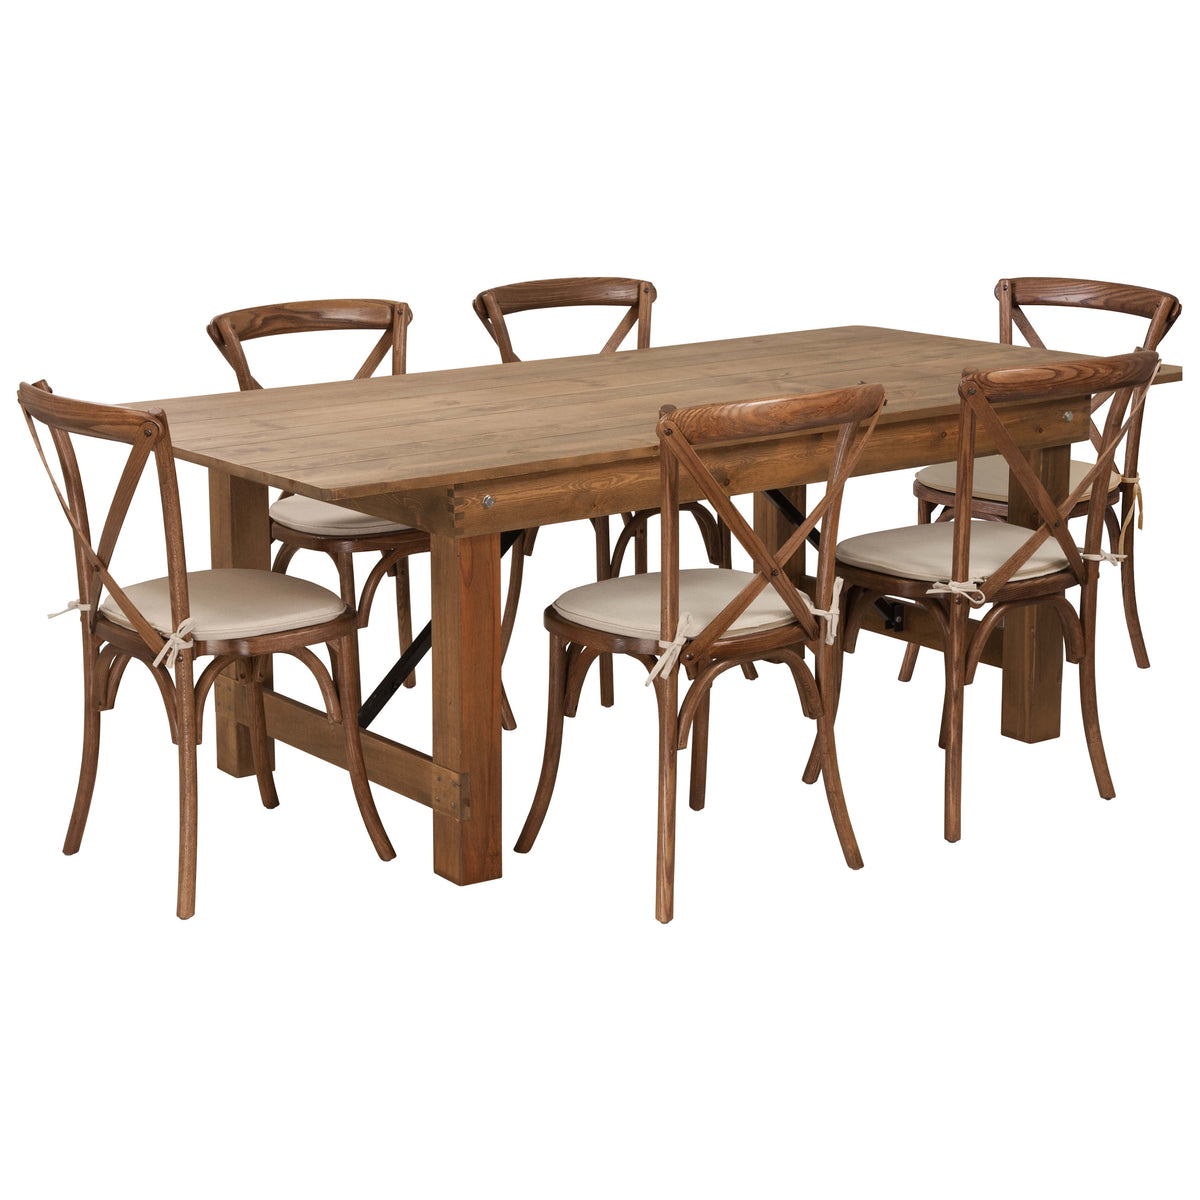 7' x 40inch Rustic Folding Farm Table Set with 6 Cross Back Chairs and Cushions